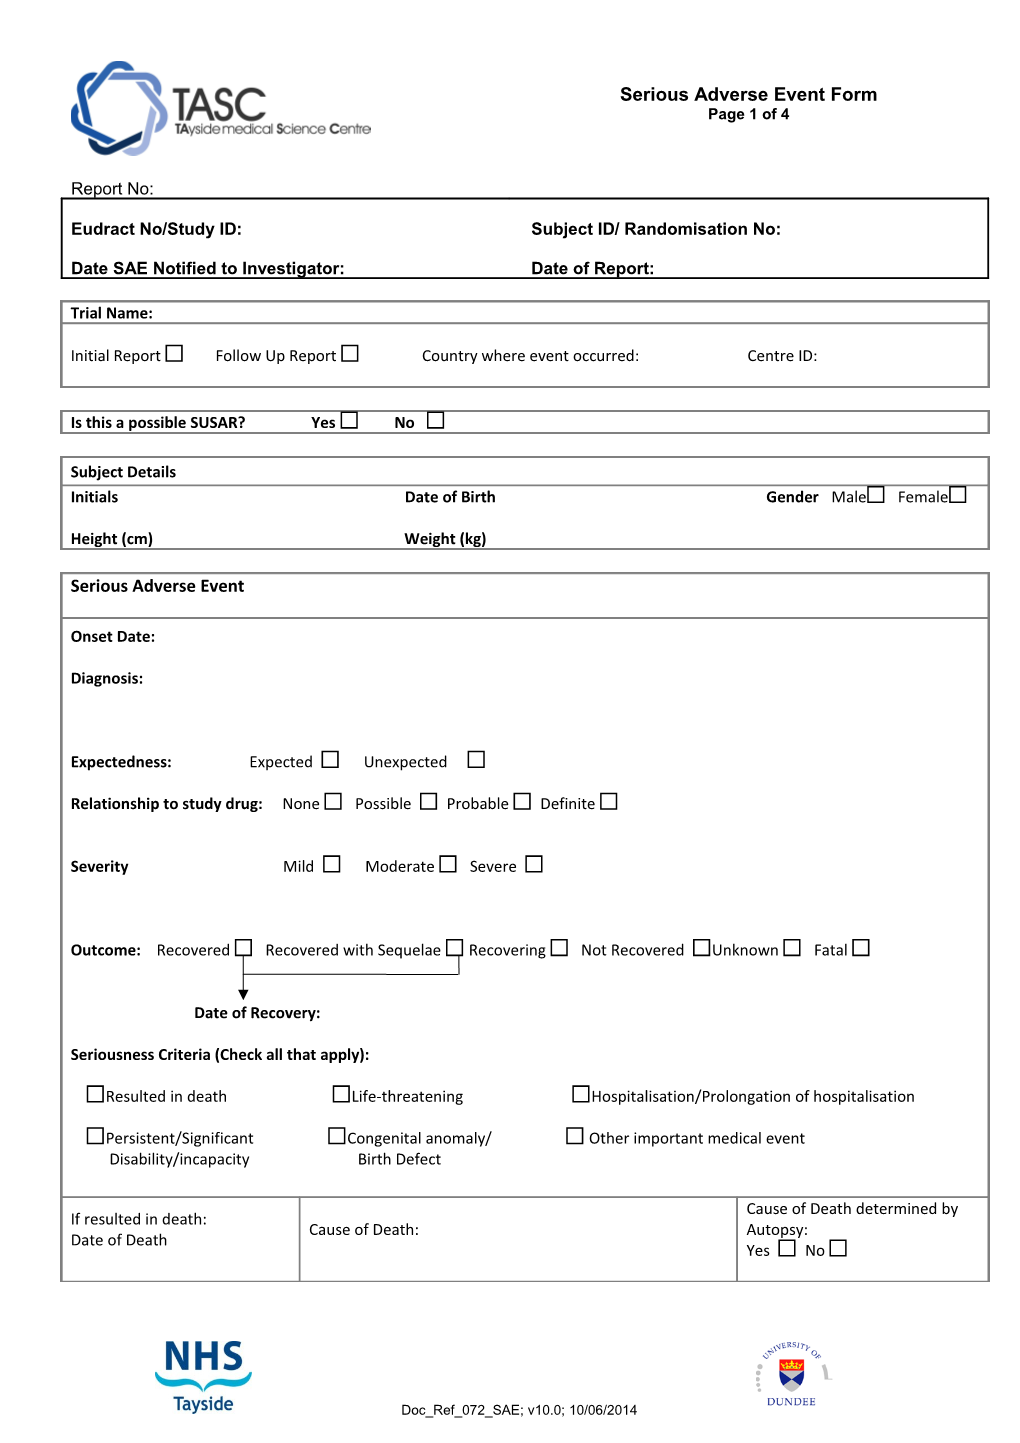 SAE Form Template 2010